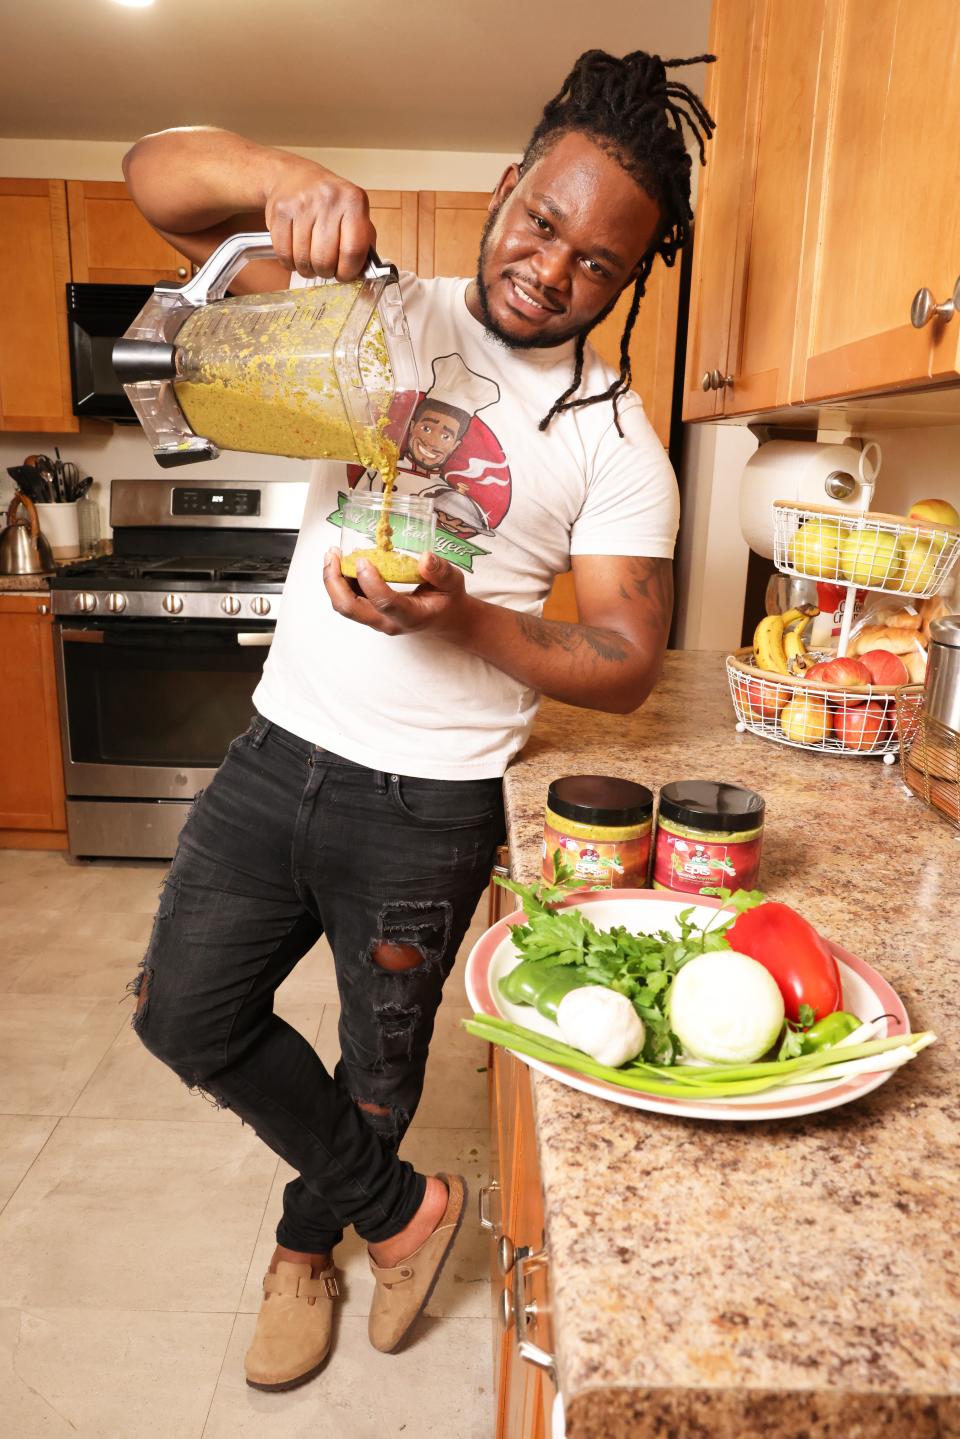 Mirbentz Jean Francois of Brockton, seen here on Saturday, Jan. 7, 2023, is founder of Did You Eat LLC, which sells its iconic Haitian seasoning sauce epis in local grocery stores.